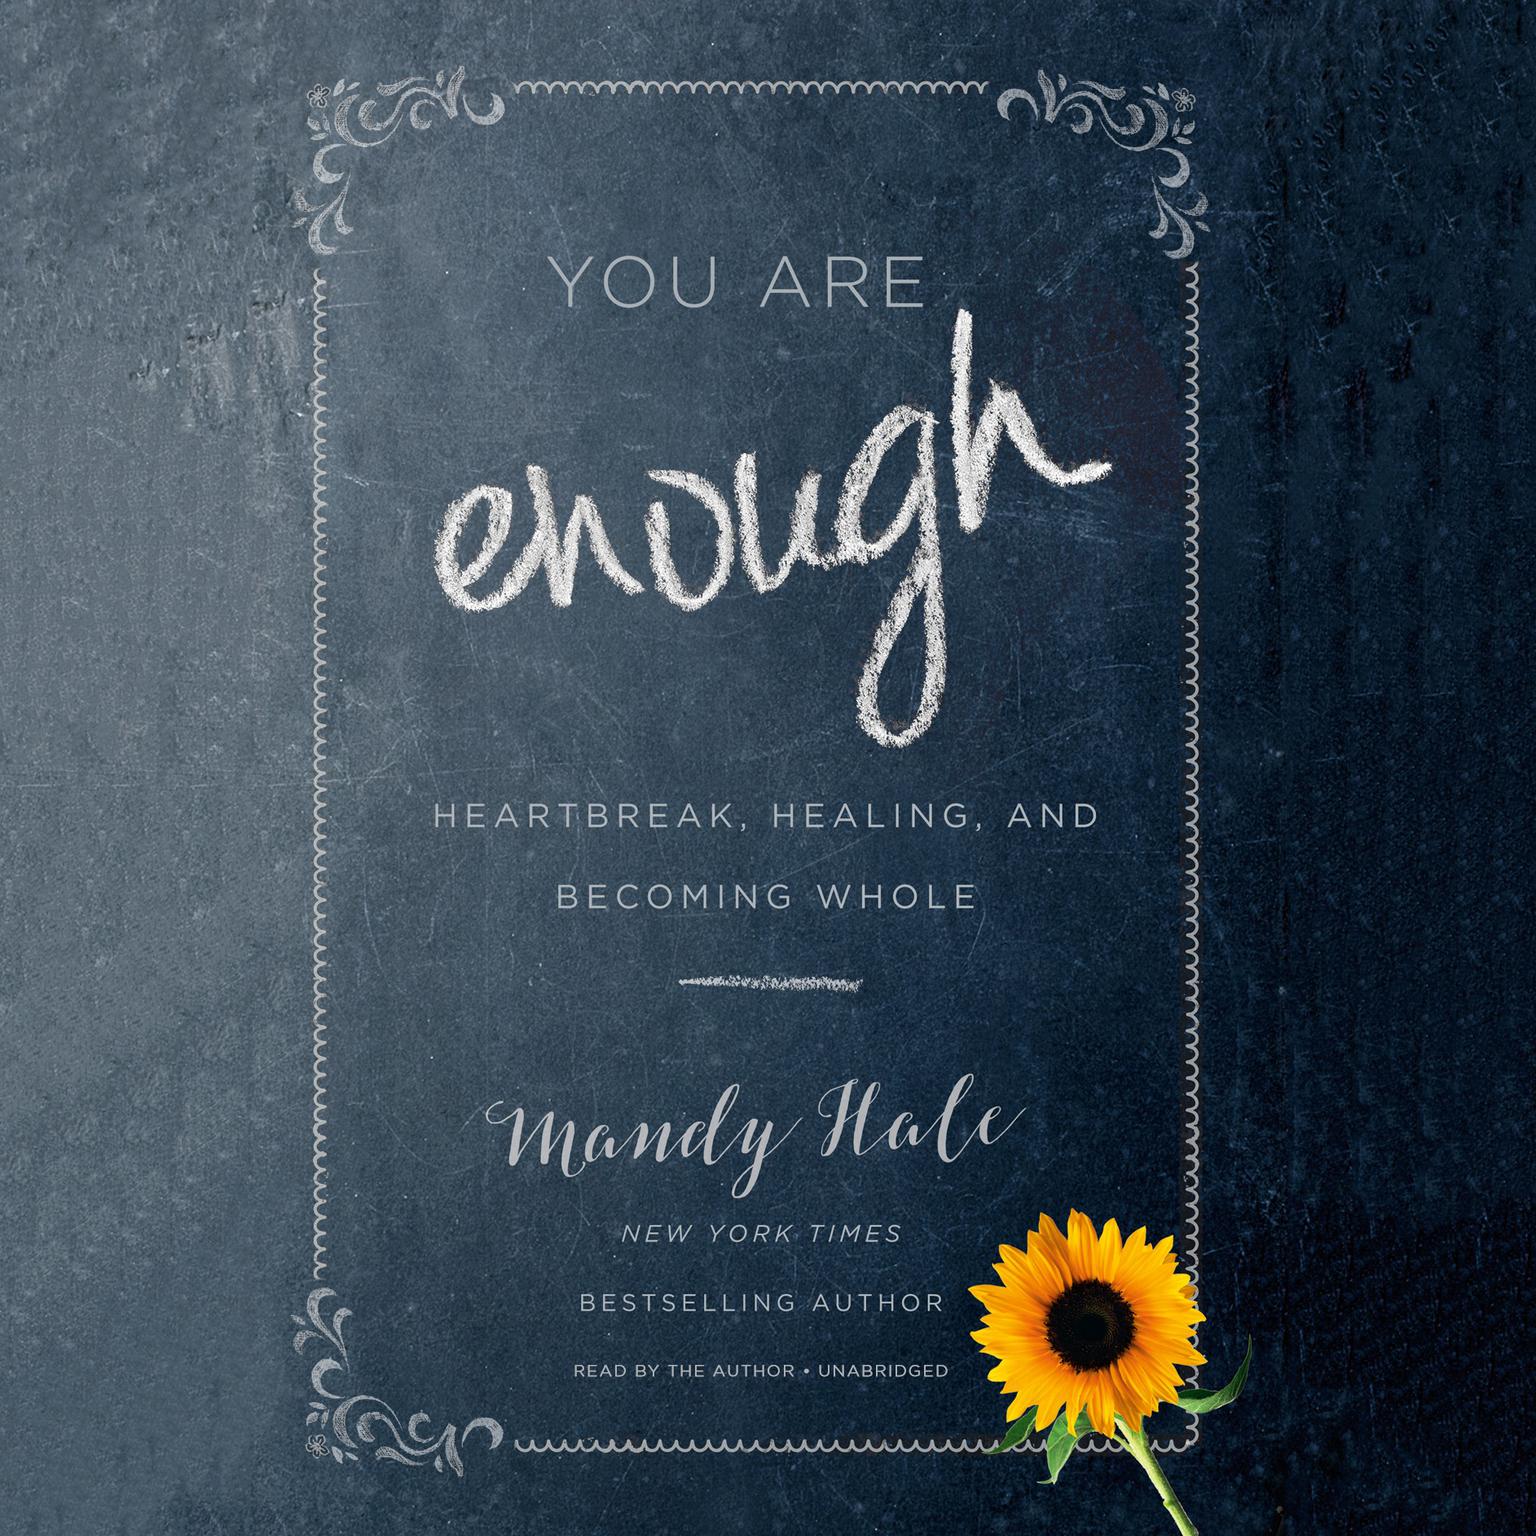 You Are Enough: Heartbreak, Healing, and Becoming Whole Audiobook, by Mandy Hale